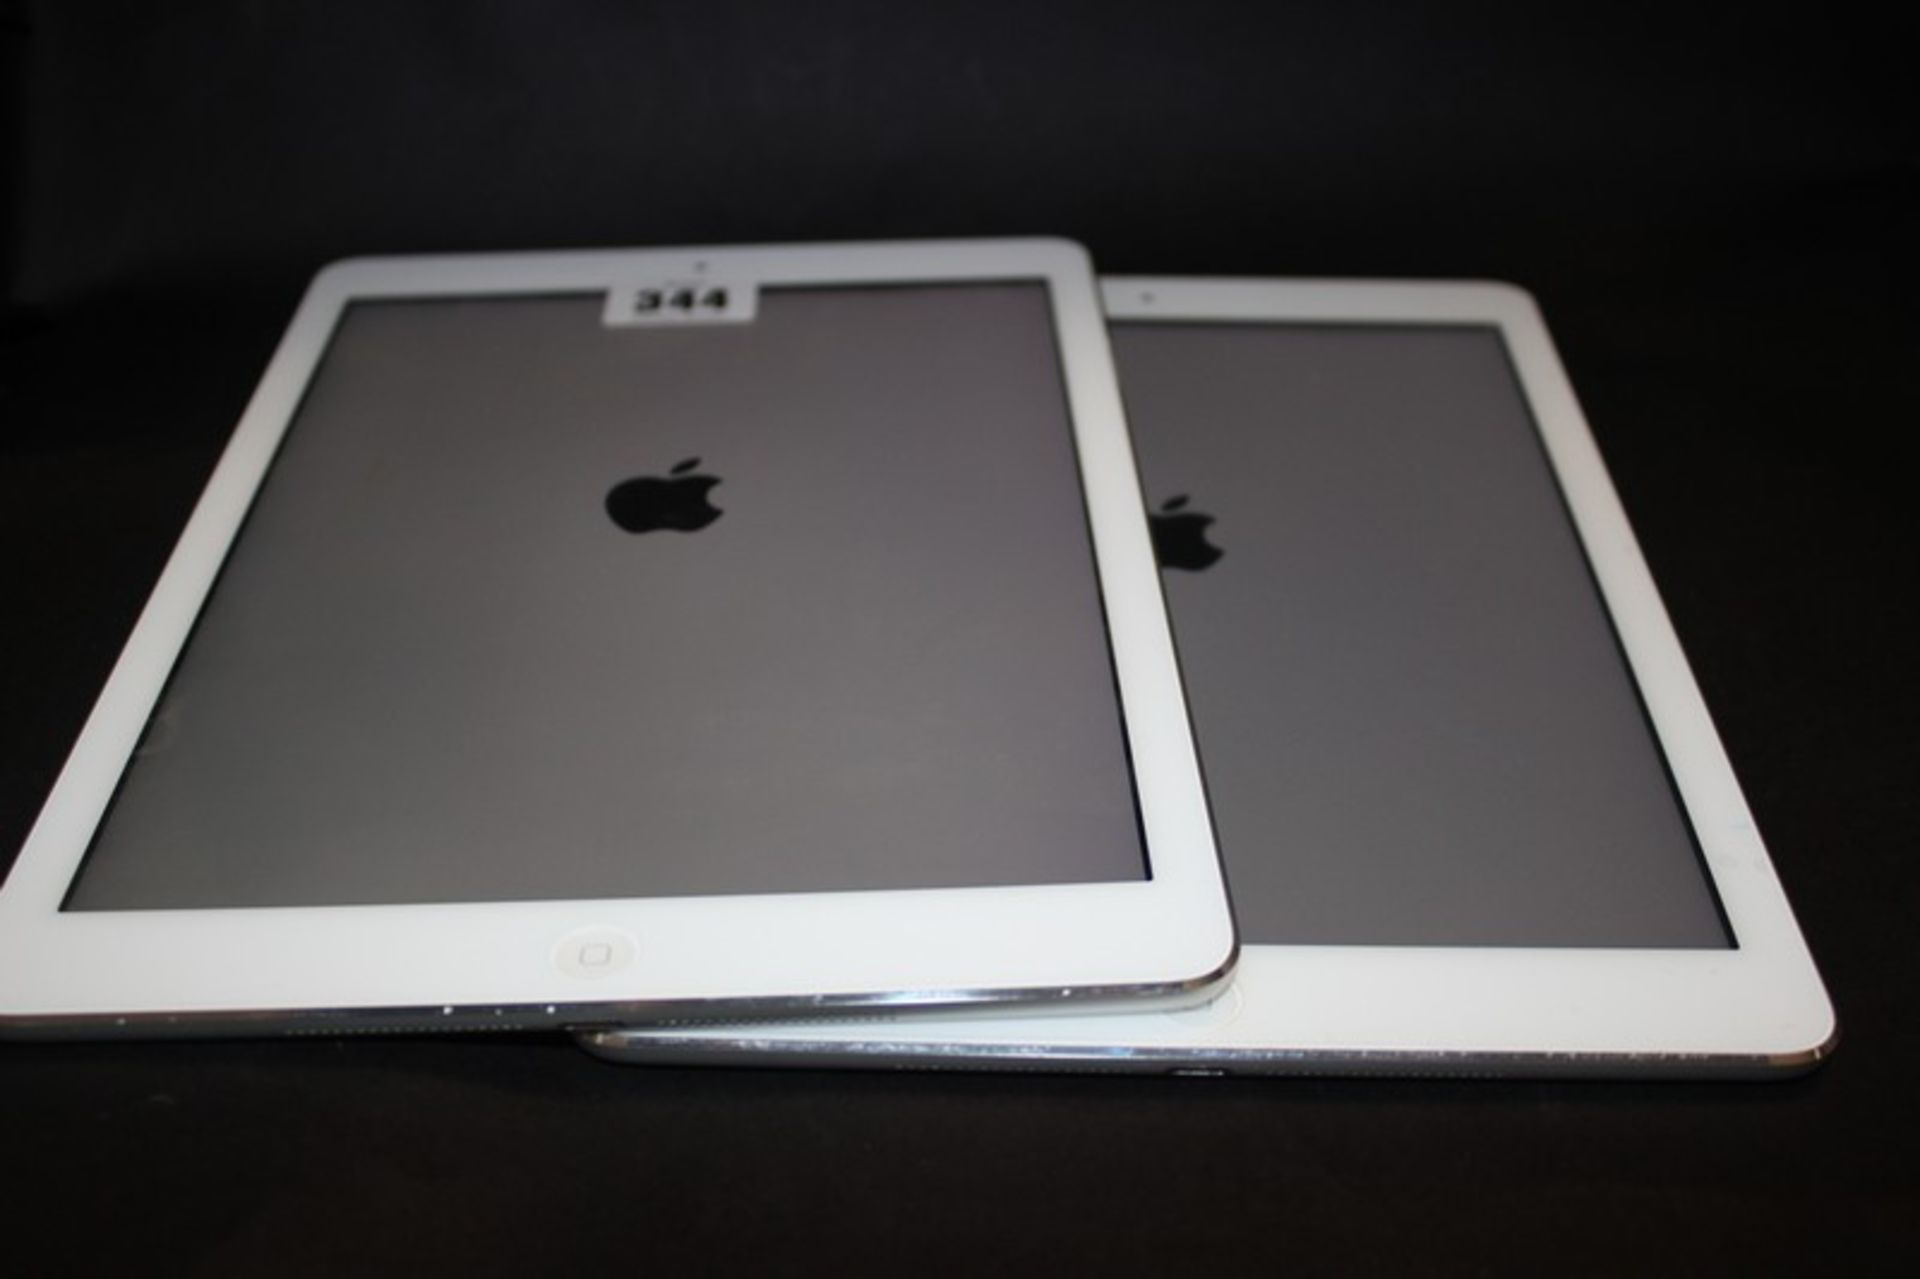 An iPad 32gb A1474 serial: DMPLMF2HFK15 and iPad 32gb A1474 serial: DMPL9S9GFK15 (Both activation